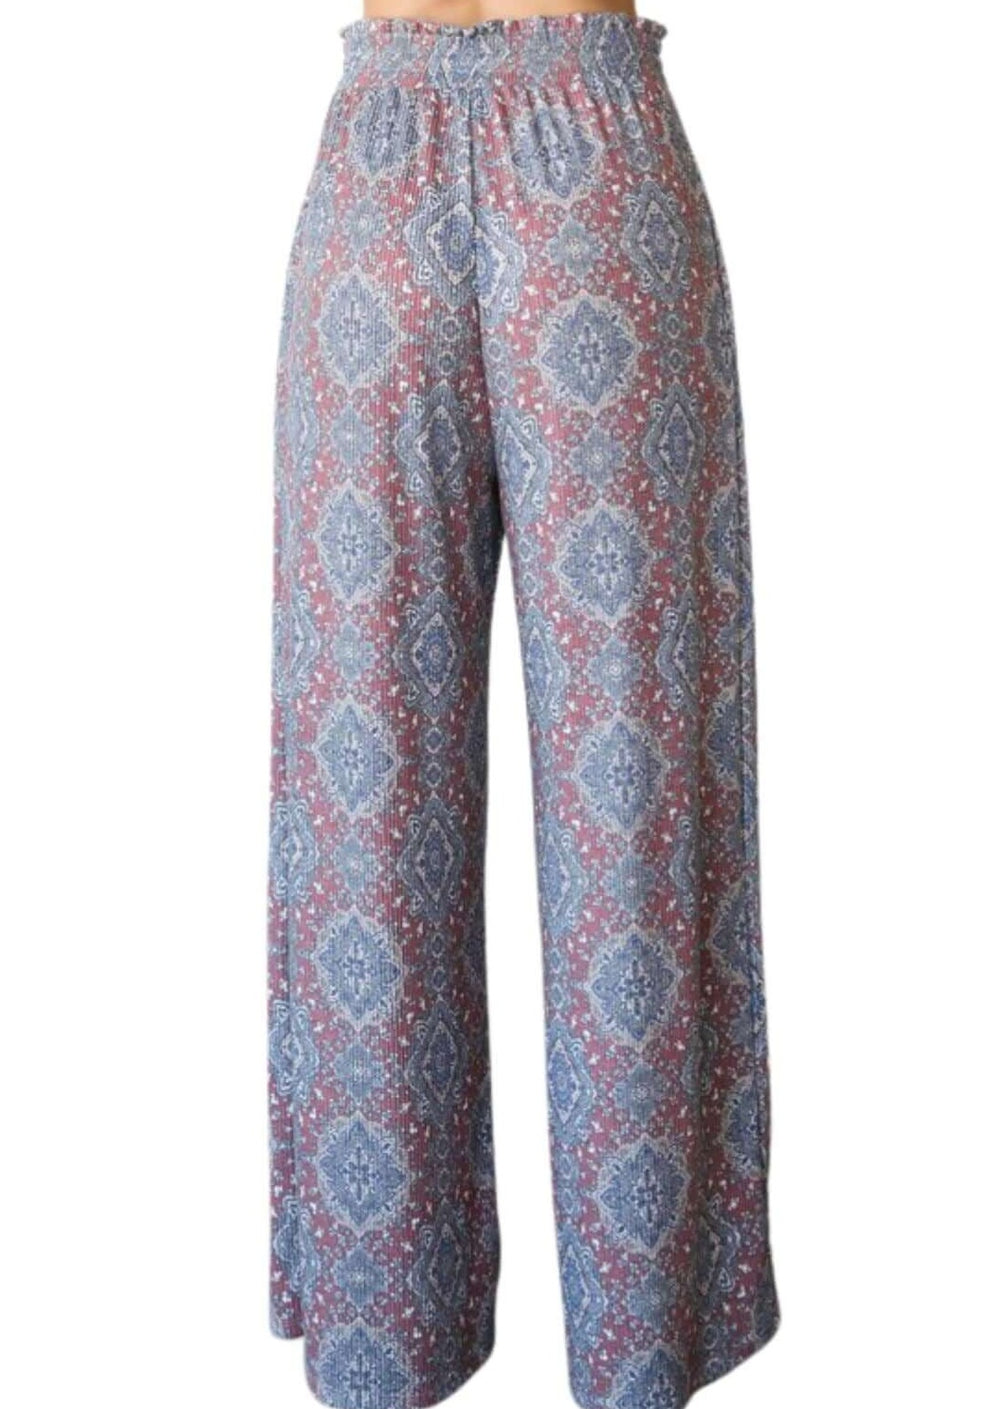 USA Made Ladies Soft & Lightweight Relaxed Fit Ribbed Aztec Pattern Wide Leg Pants in Blue, Off White and Burgundy | Classy Cozy Cool Women's Made in America Clothing Boutique